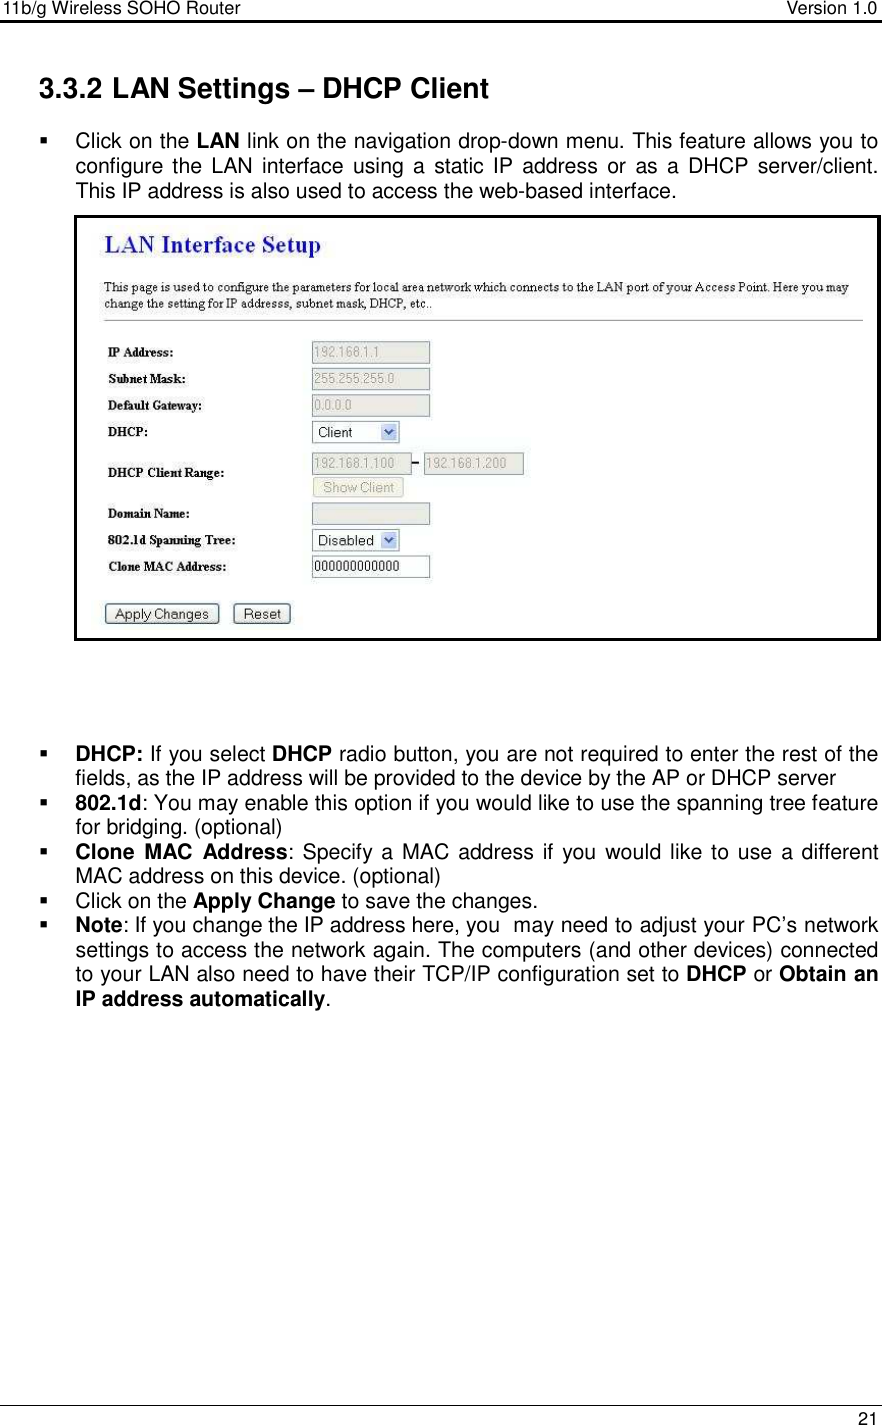 11b/g Wireless SOHO Router                                     Version 1.0    21  3.3.2 LAN Settings – DHCP Client    Click on the LAN link on the navigation drop-down menu. This feature allows you to configure the LAN  interface  using a  static  IP  address  or as a  DHCP  server/client.  This IP address is also used to access the web-based interface.                         DHCP: If you select DHCP radio button, you are not required to enter the rest of the fields, as the IP address will be provided to the device by the AP or DHCP server  802.1d: You may enable this option if you would like to use the spanning tree feature for bridging. (optional)  Clone  MAC  Address: Specify a MAC address if you  would  like to use a different MAC address on this device. (optional)   Click on the Apply Change to save the changes.   Note: If you change the IP address here, you  may need to adjust your PC’s network settings to access the network again. The computers (and other devices) connected to your LAN also need to have their TCP/IP configuration set to DHCP or Obtain an IP address automatically.    